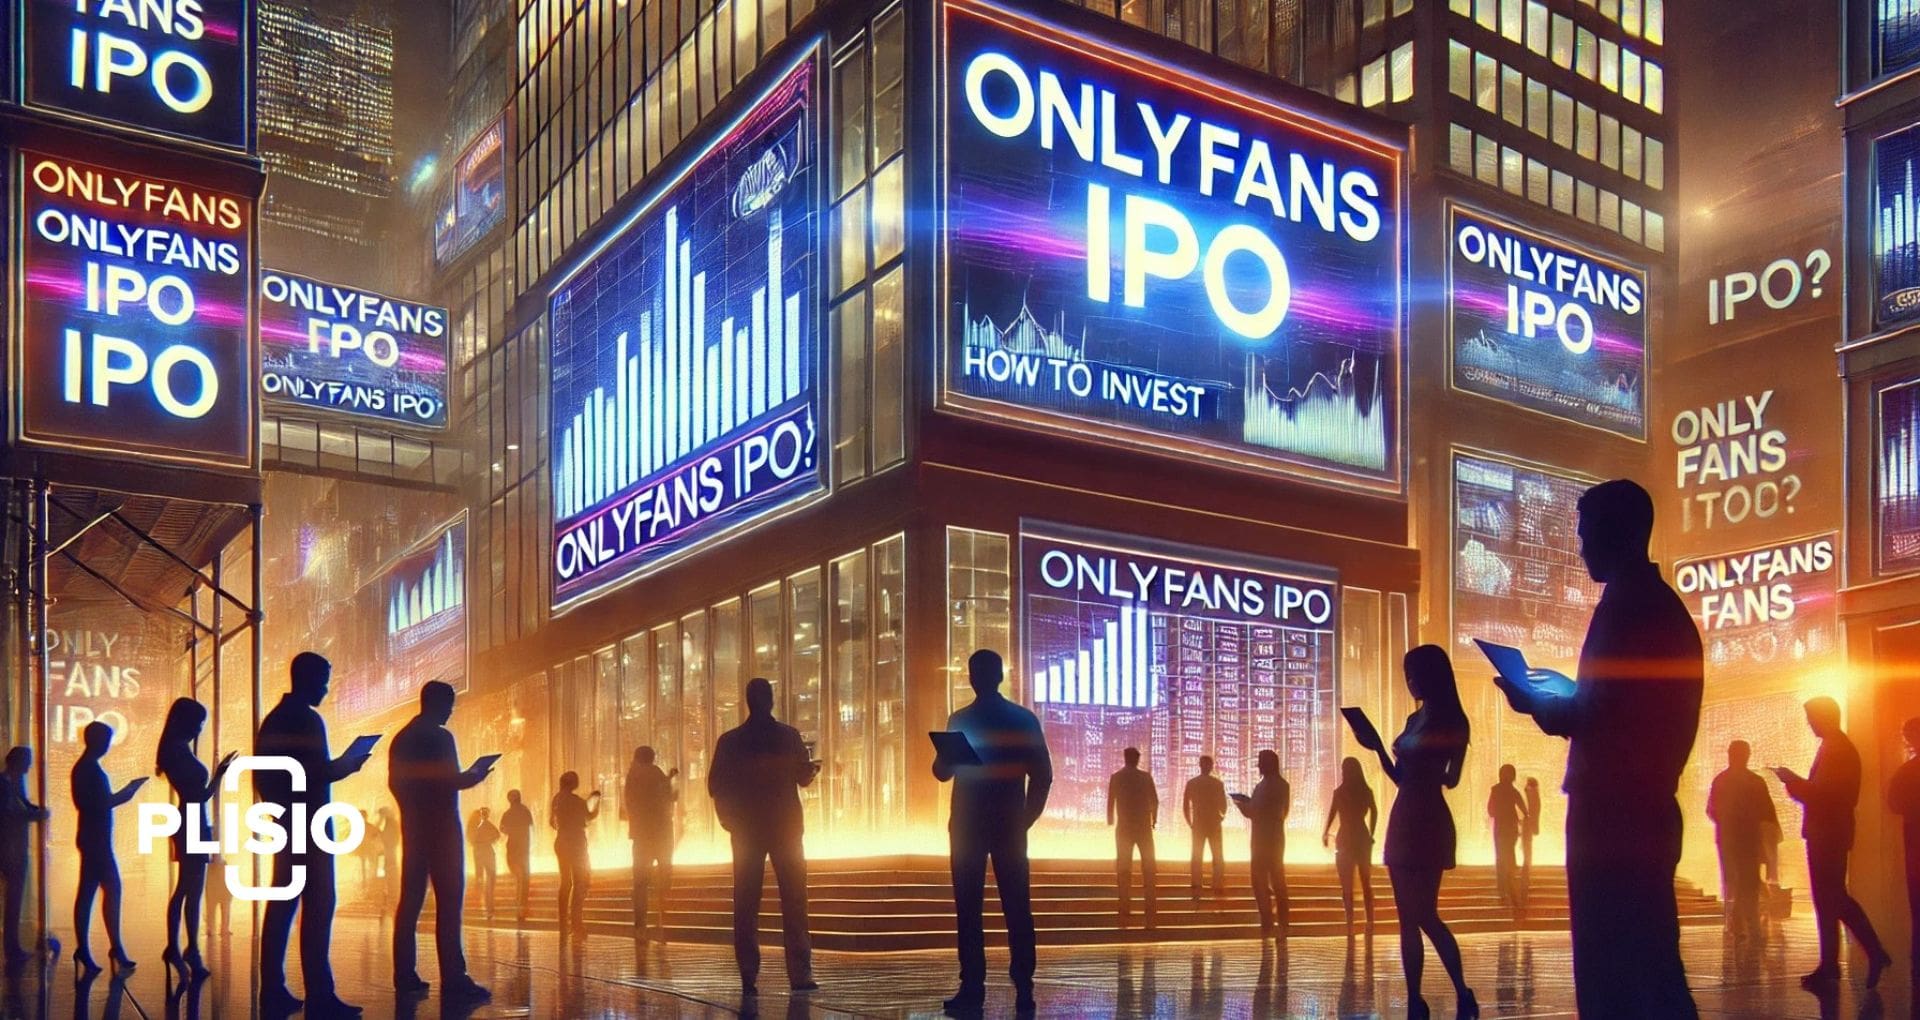 Azioni OnlyFans: come investire nell'IPO di OnlyFans?